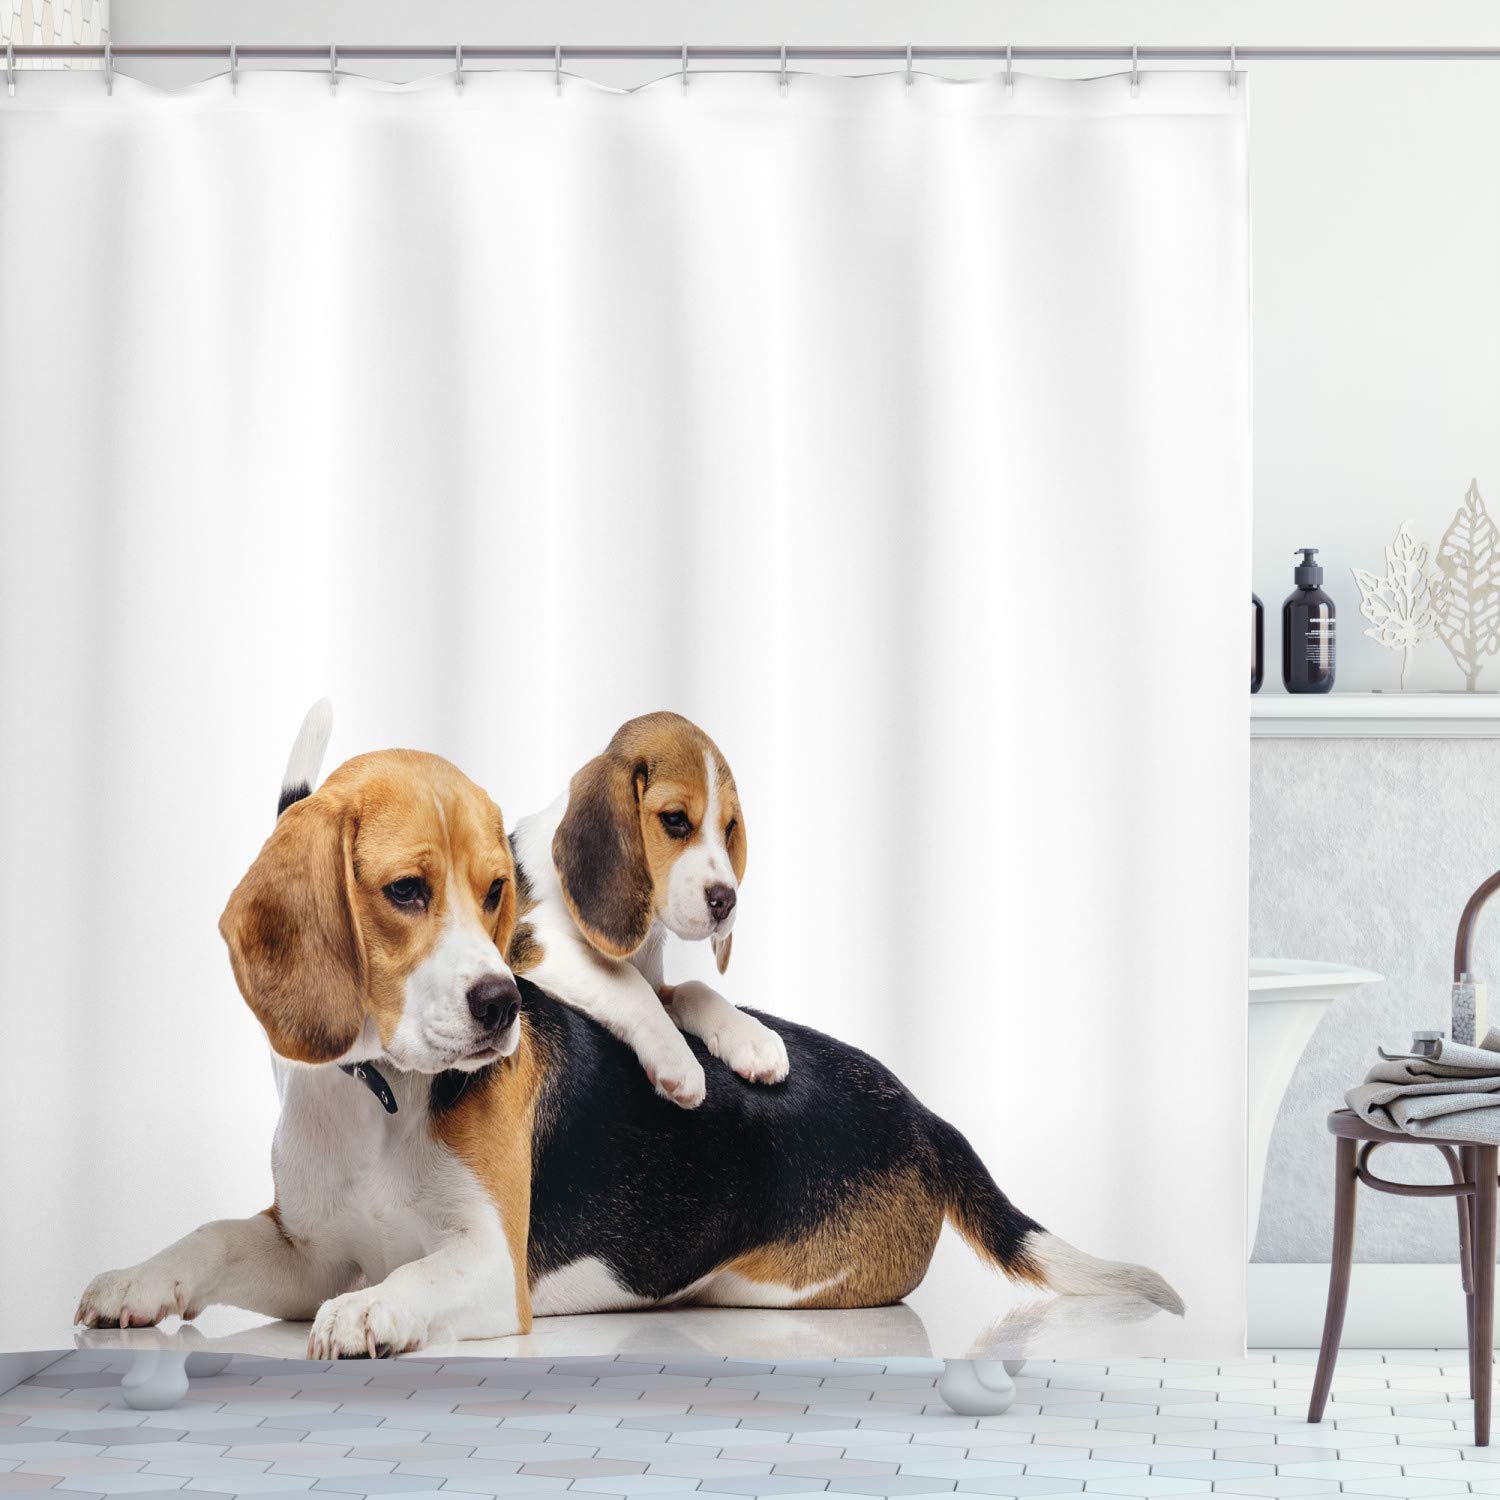 How to Care for Beagle